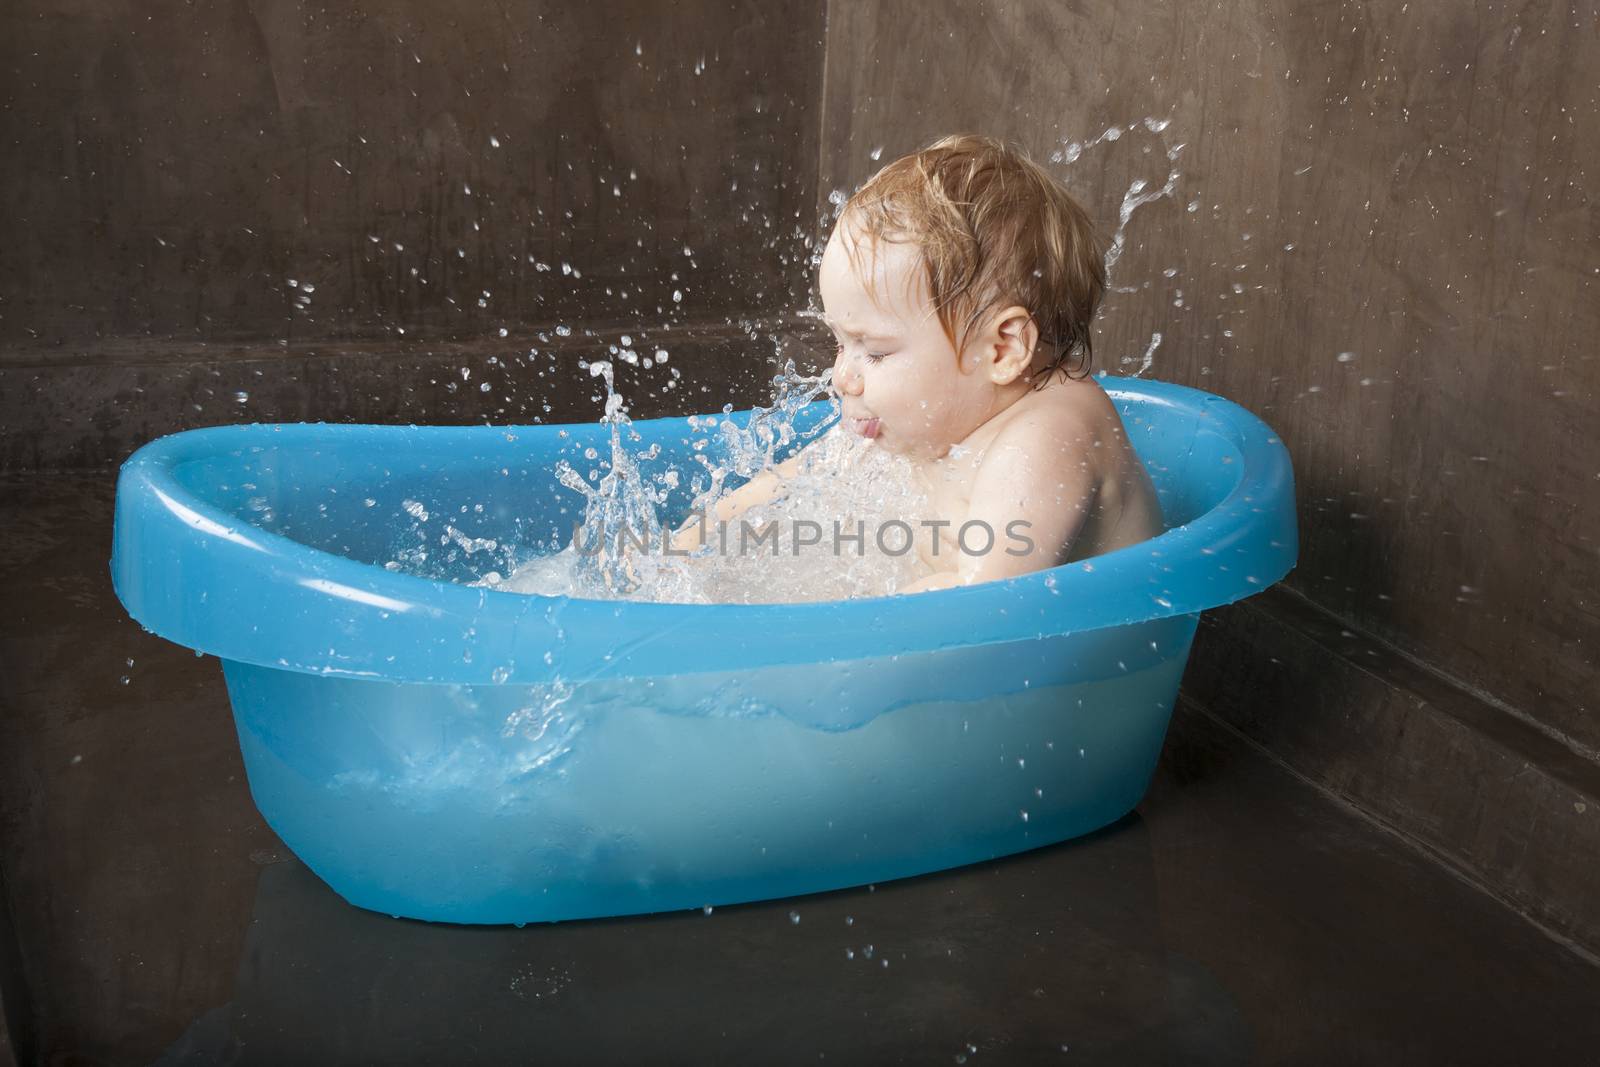 blonde naked baby washing in blue little bath indoor with brown background